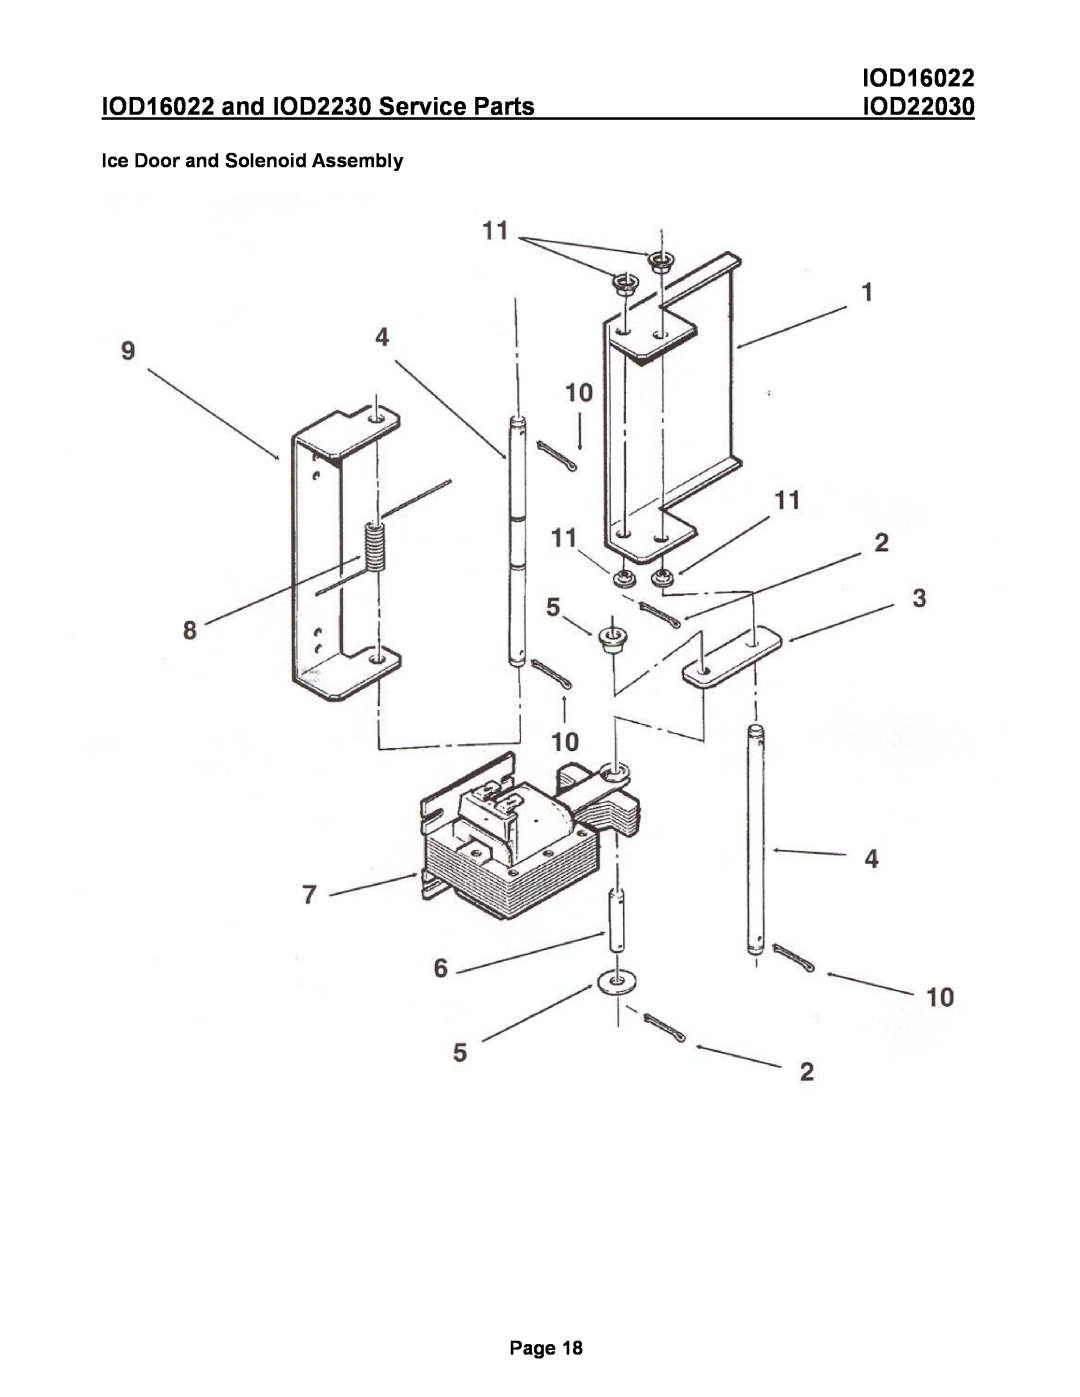 Ice-O-Matic IOD22030 manual Ice Door and Solenoid Assembly, IOD16022 and IOD2230 Service Parts, Page 